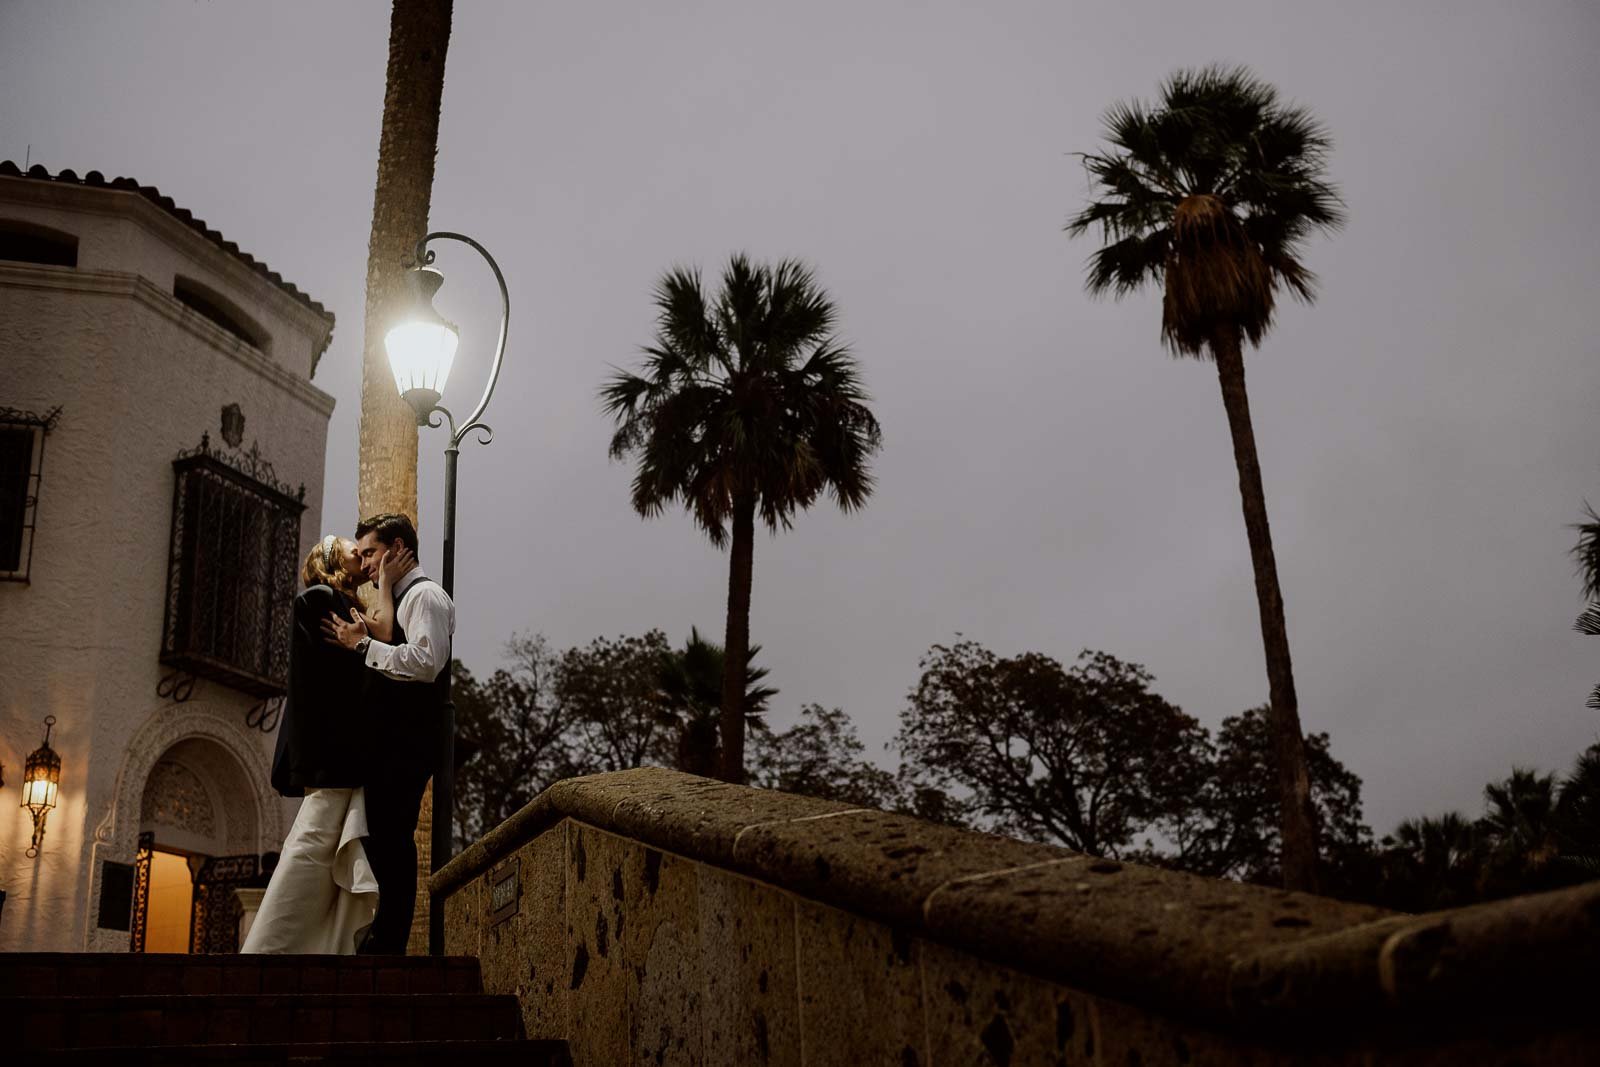 The newly married couple photographed at the McNay Art Museum photographed at dusk under the lamp with palm trees against the sky